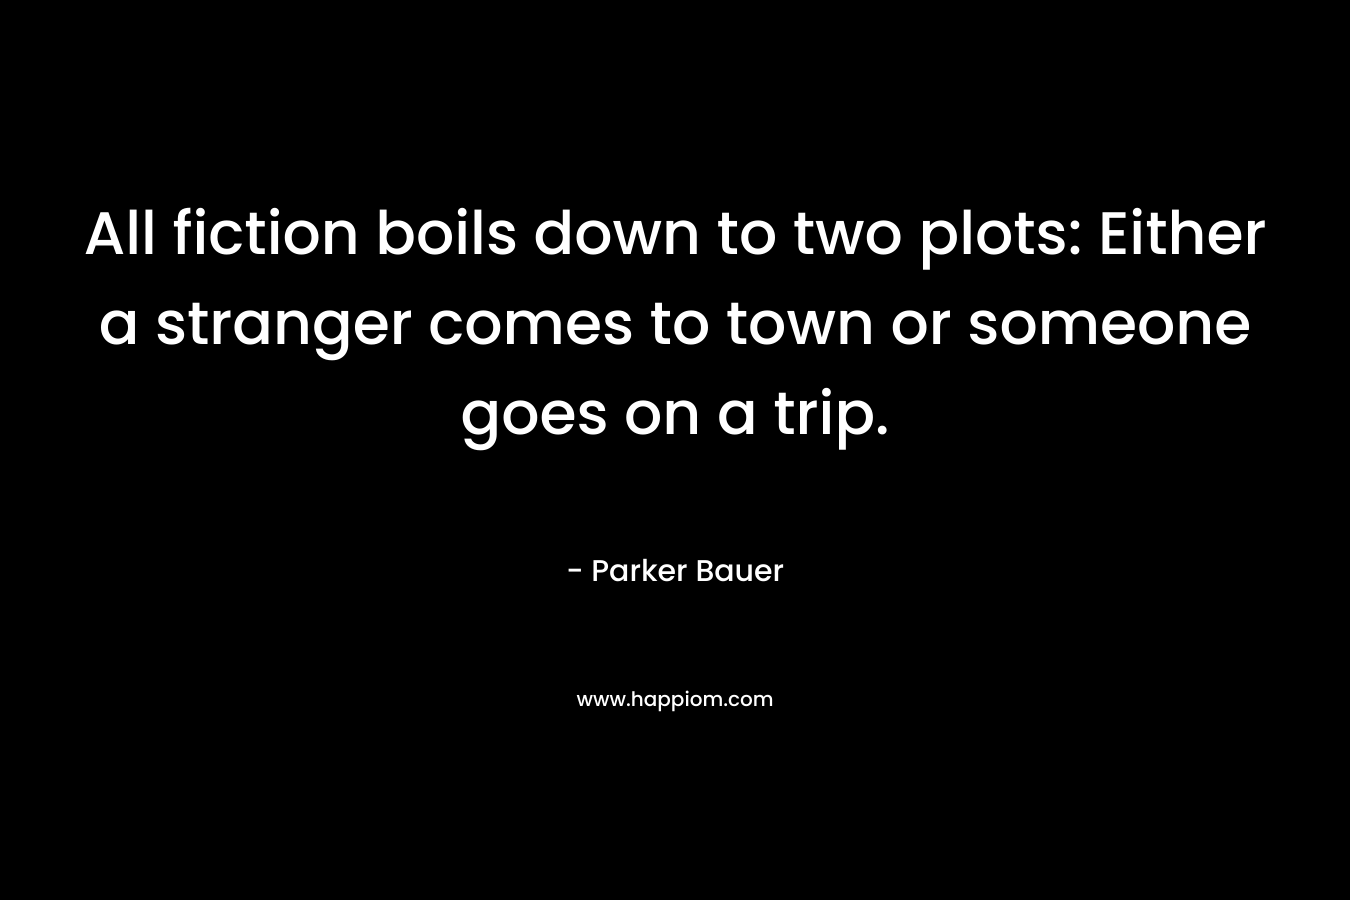 All fiction boils down to two plots: Either a stranger comes to town or someone goes on a trip. – Parker Bauer